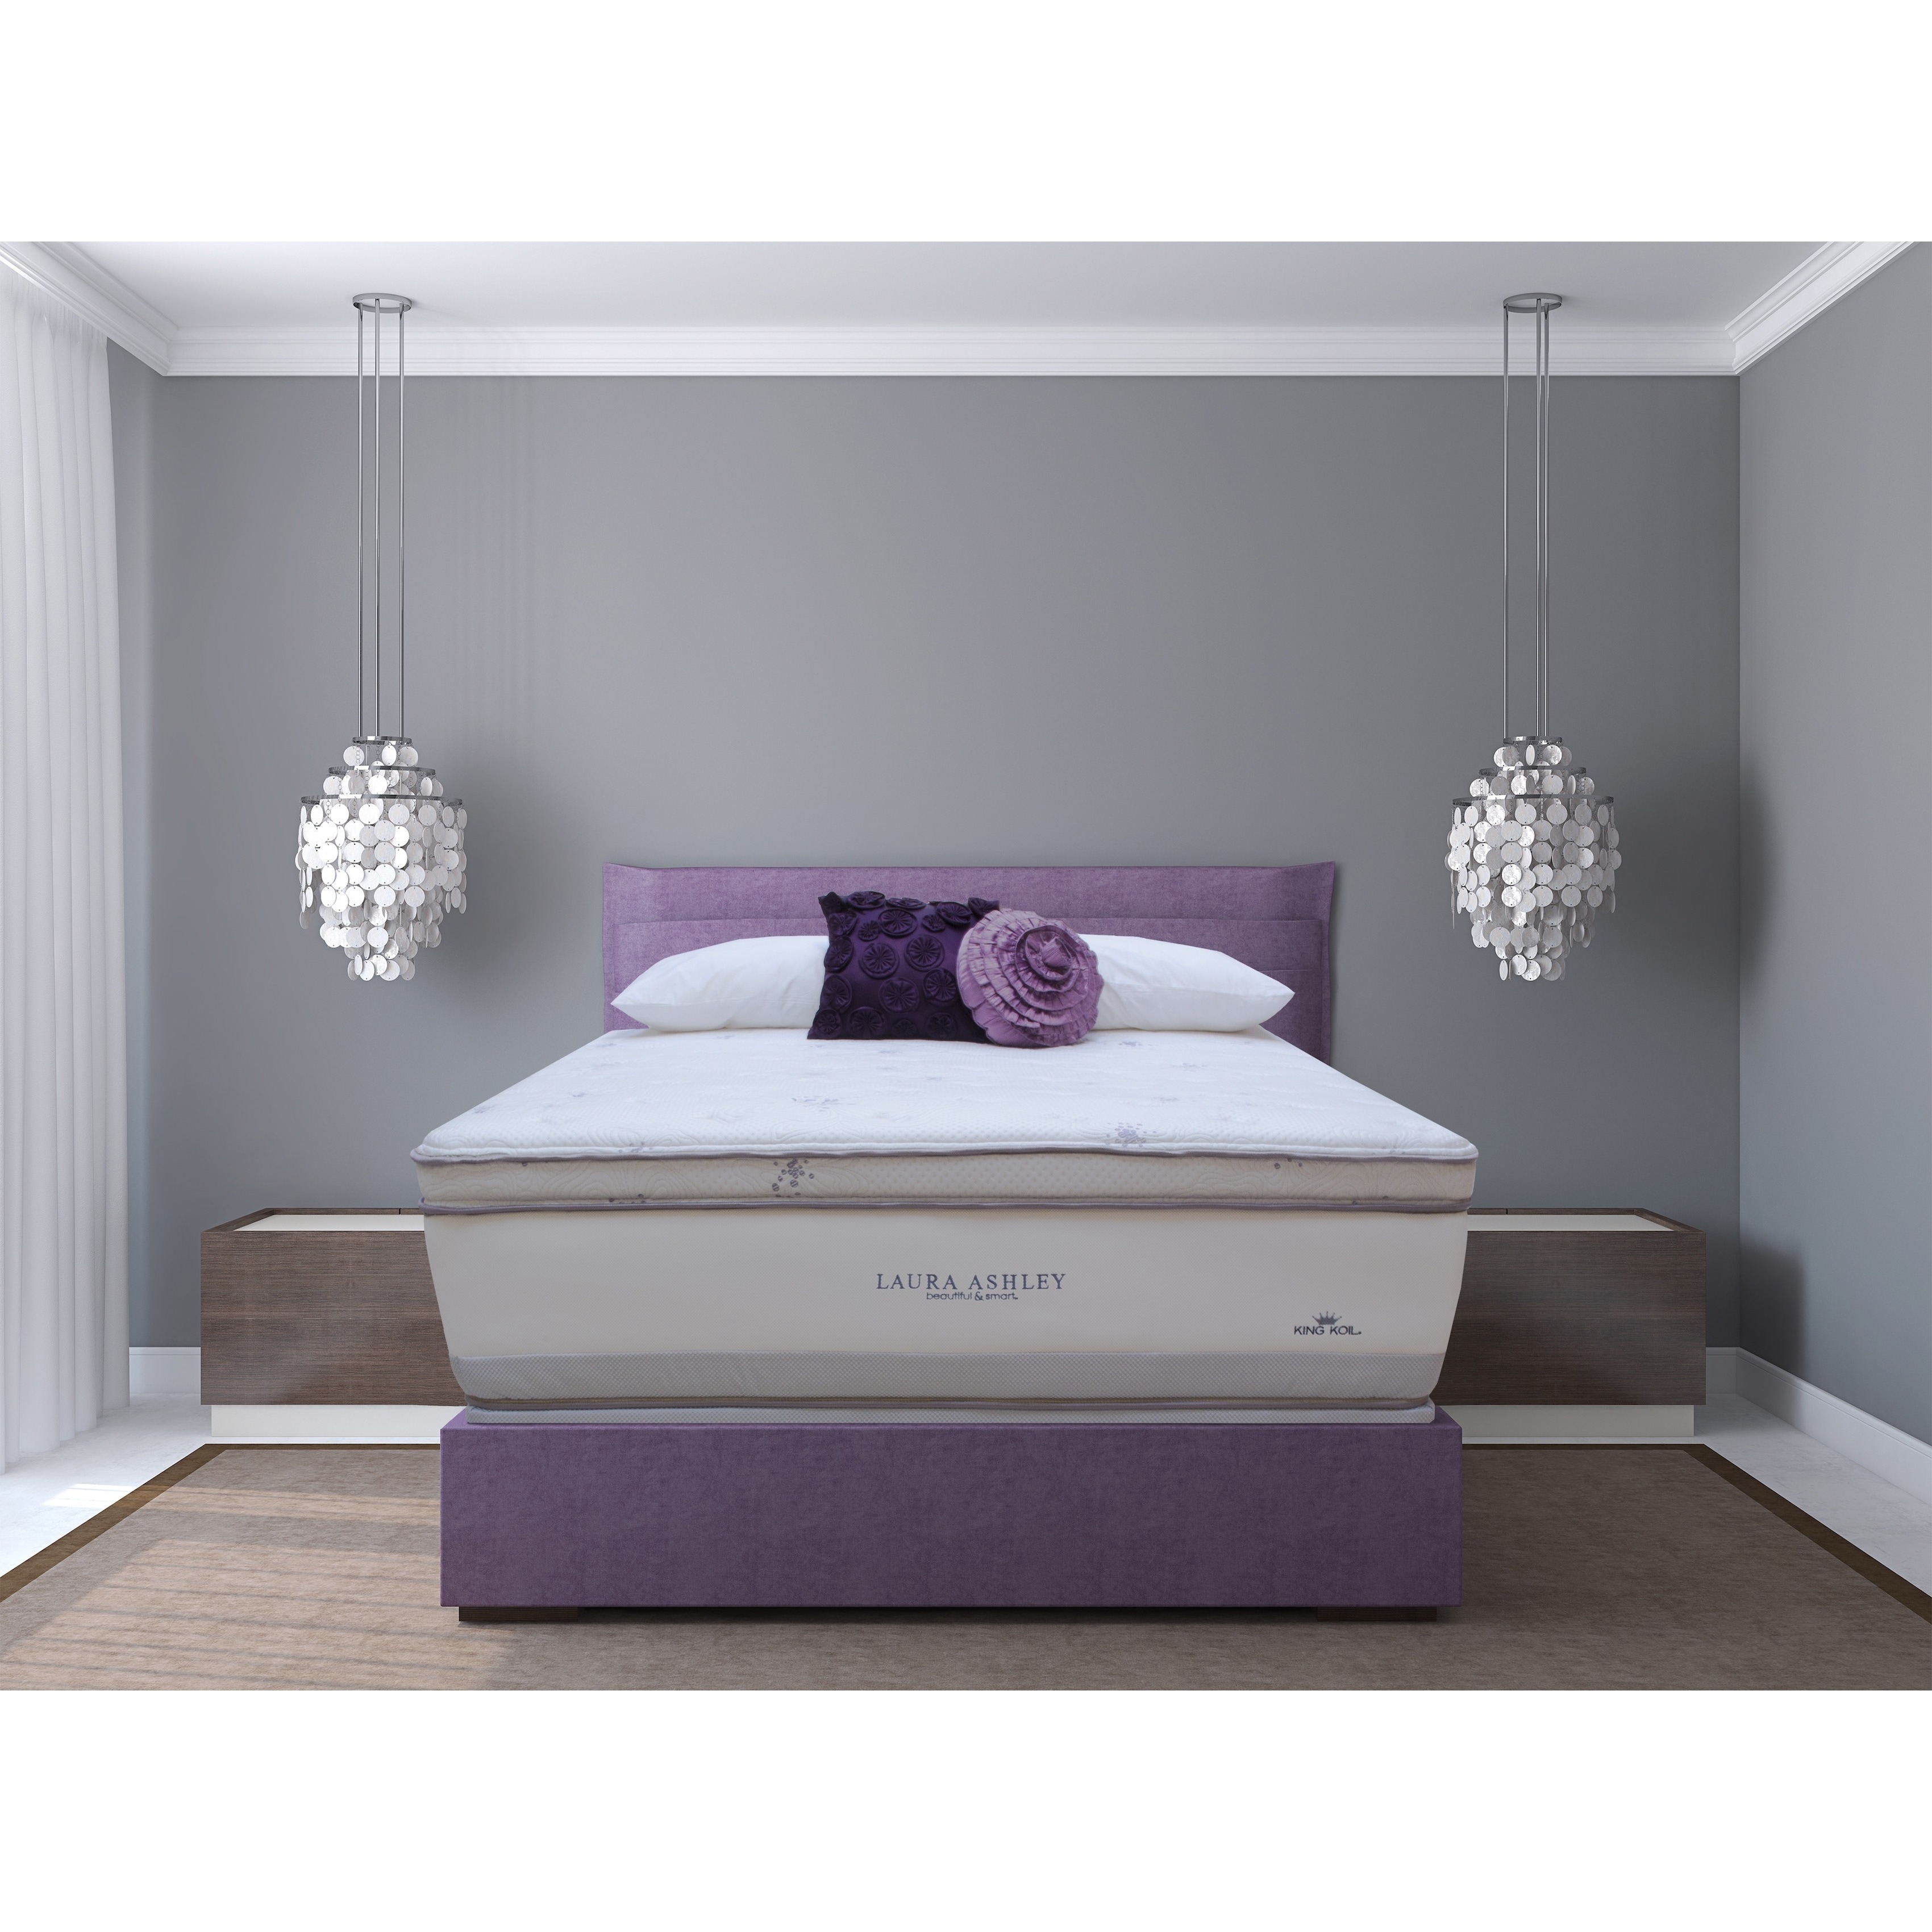 Laura Ashley Laura Ashley Lavender Euro Pillowtop Super size Queen size Mattress And Foundation Sets White Size Queen